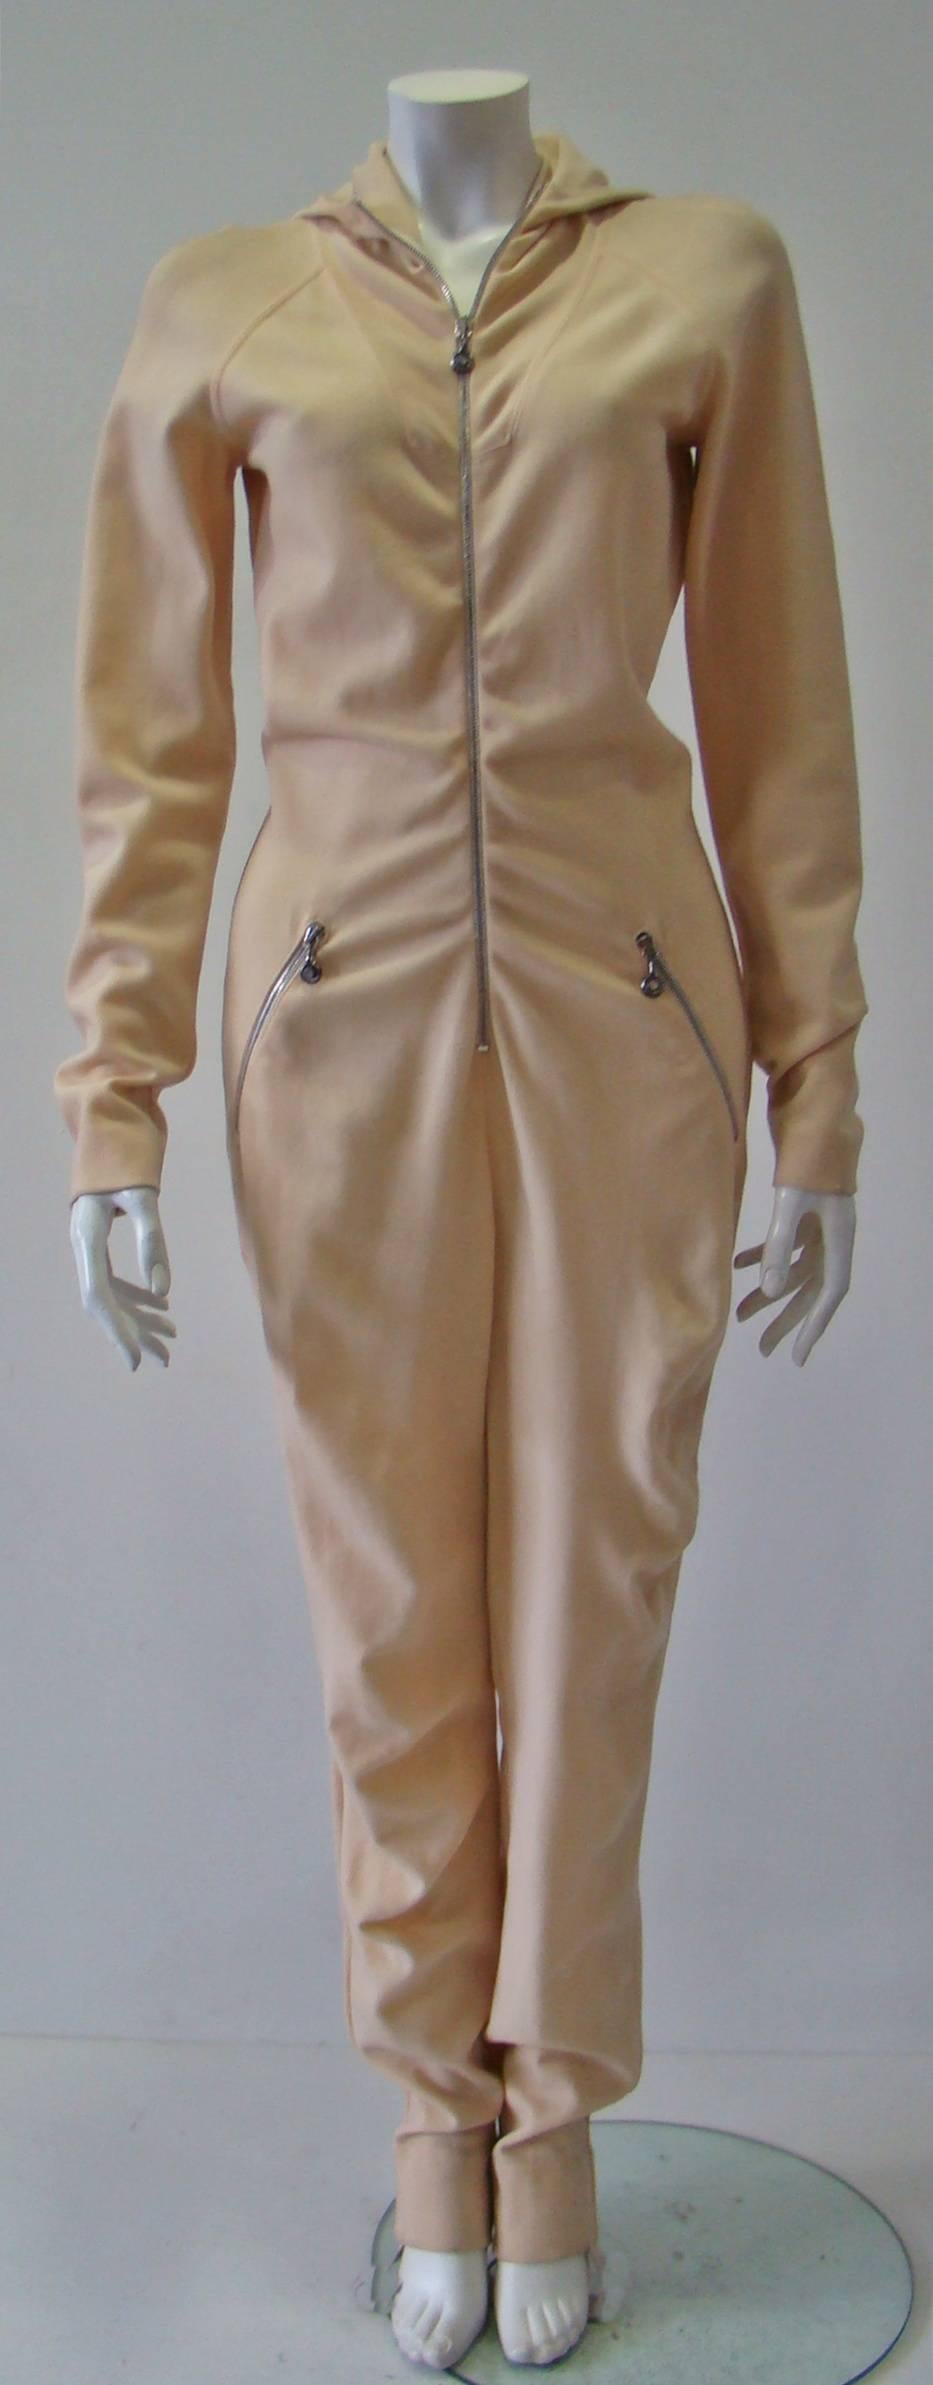 Brown Rare Gianfranco Ferre Hooded Zip Jumpsuit 1990's For Sale